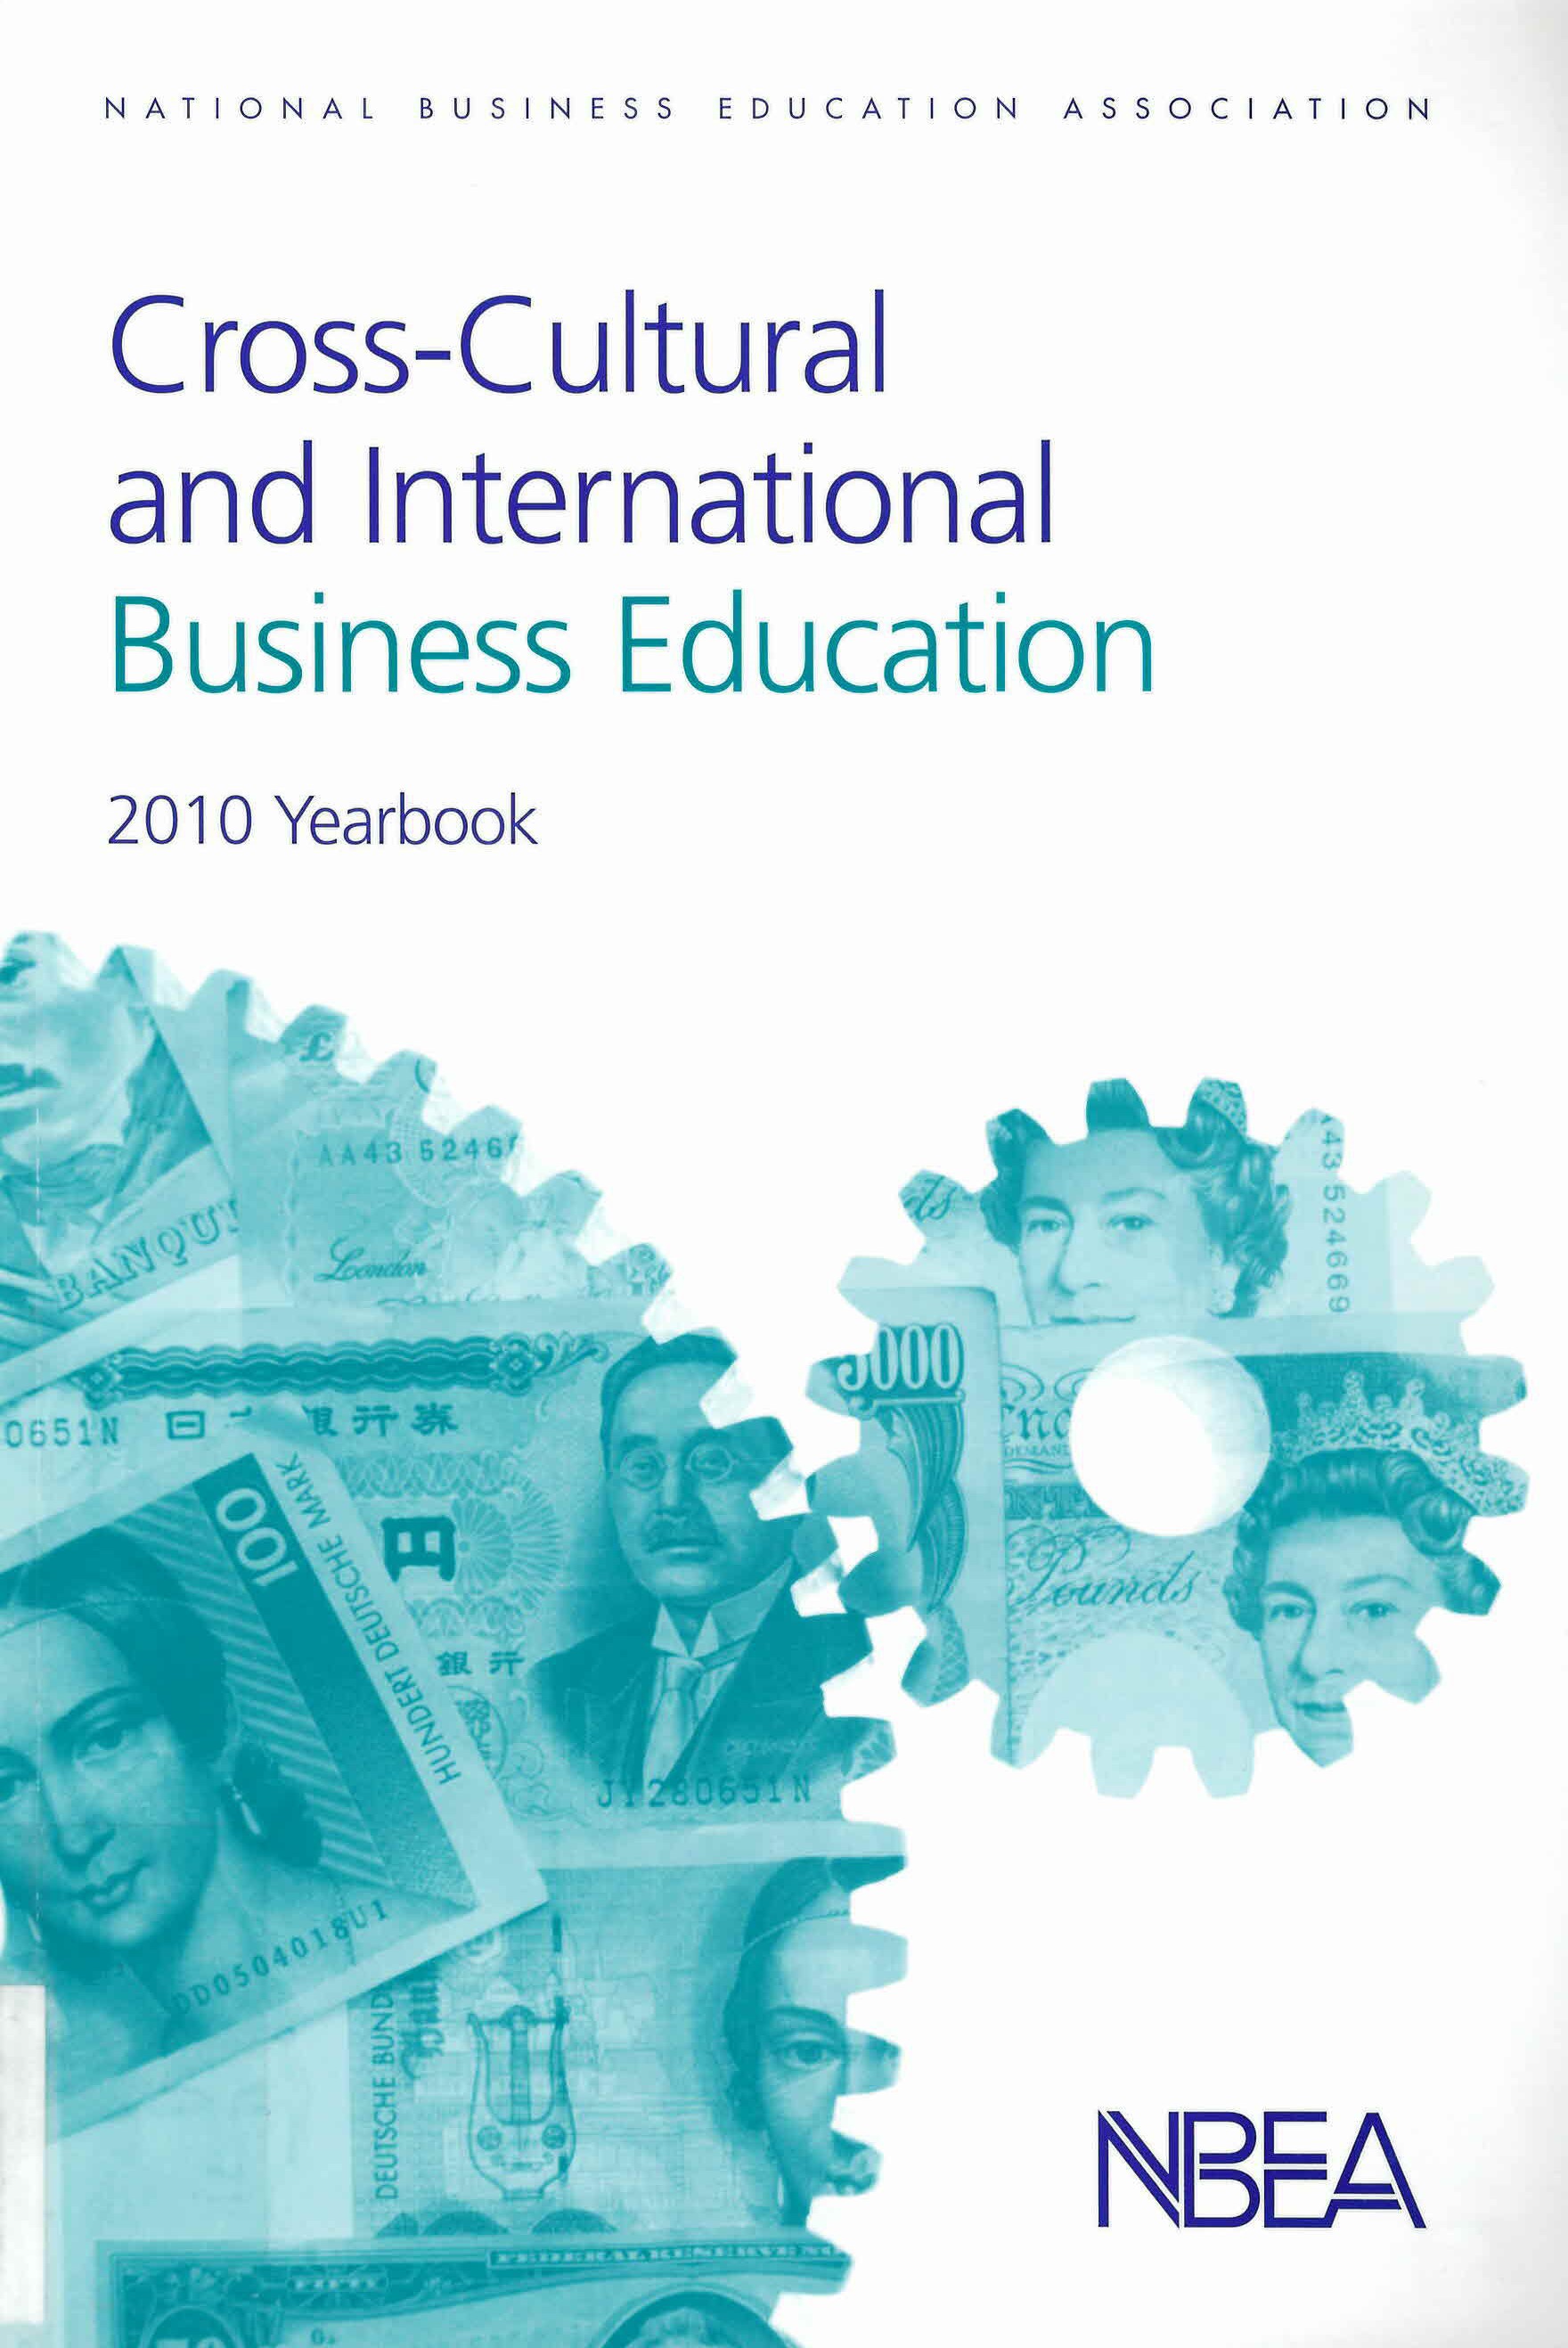 Cross-cultural and international business education